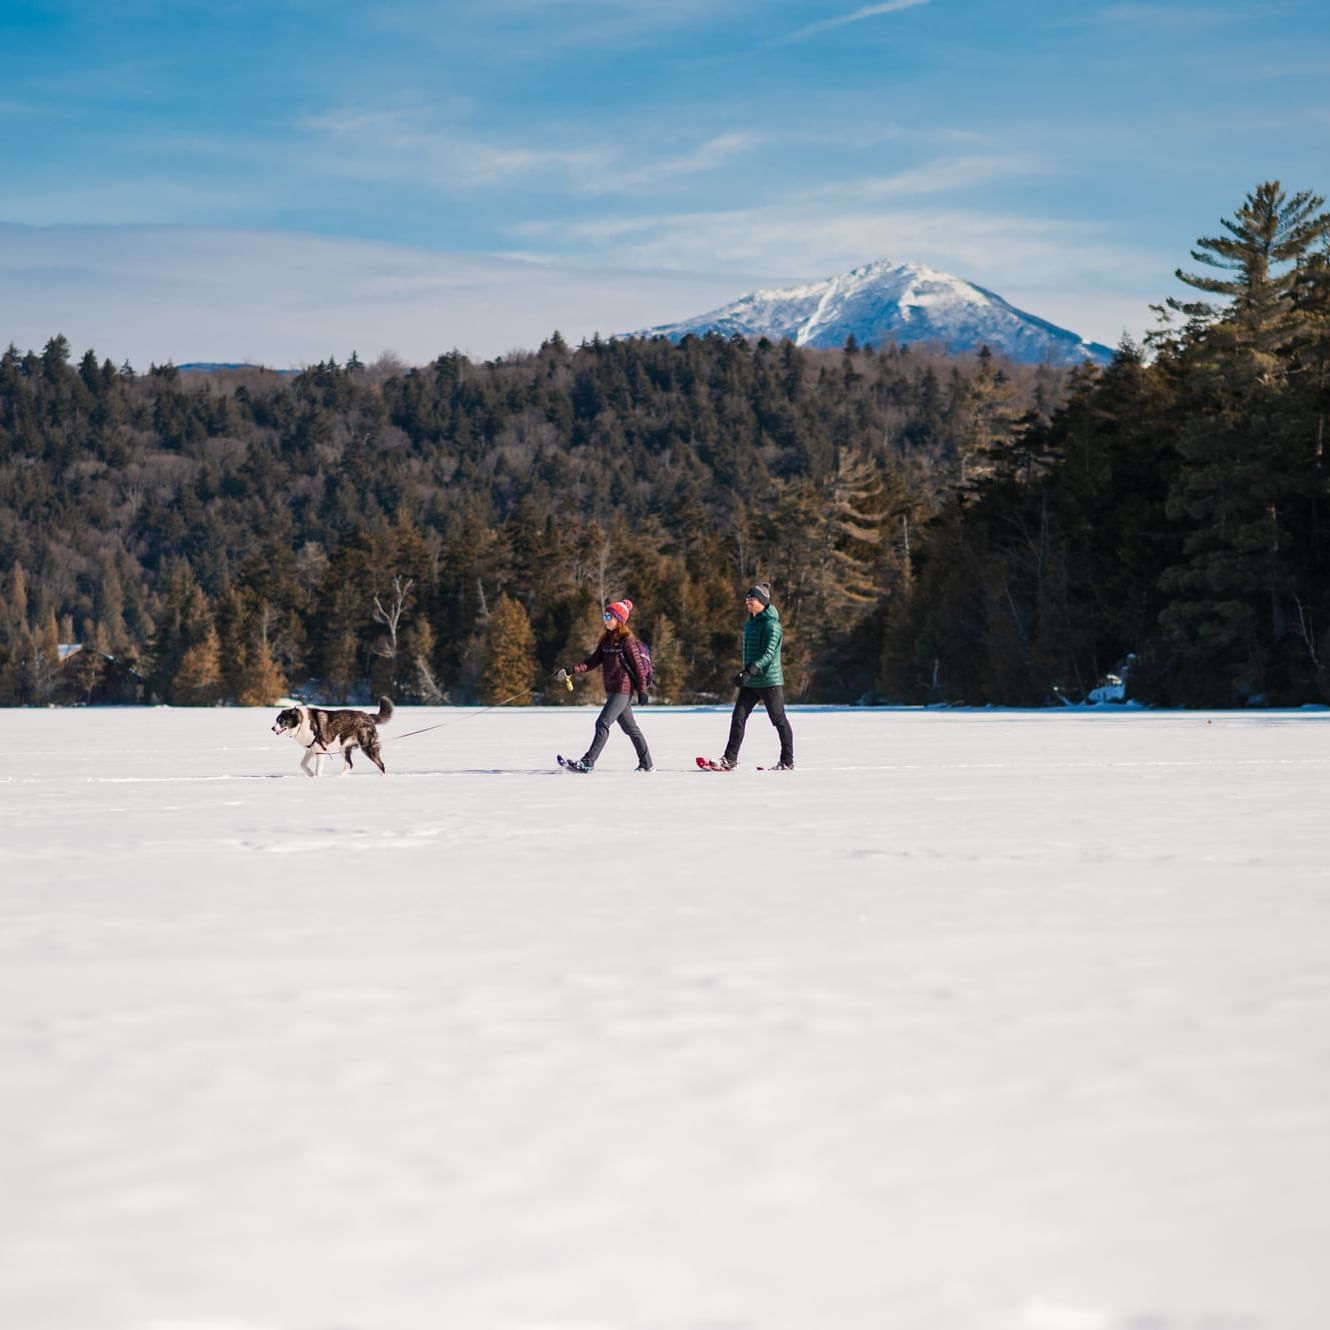 A couple with a dog snowshoeing on Lake near High Peaks Resort